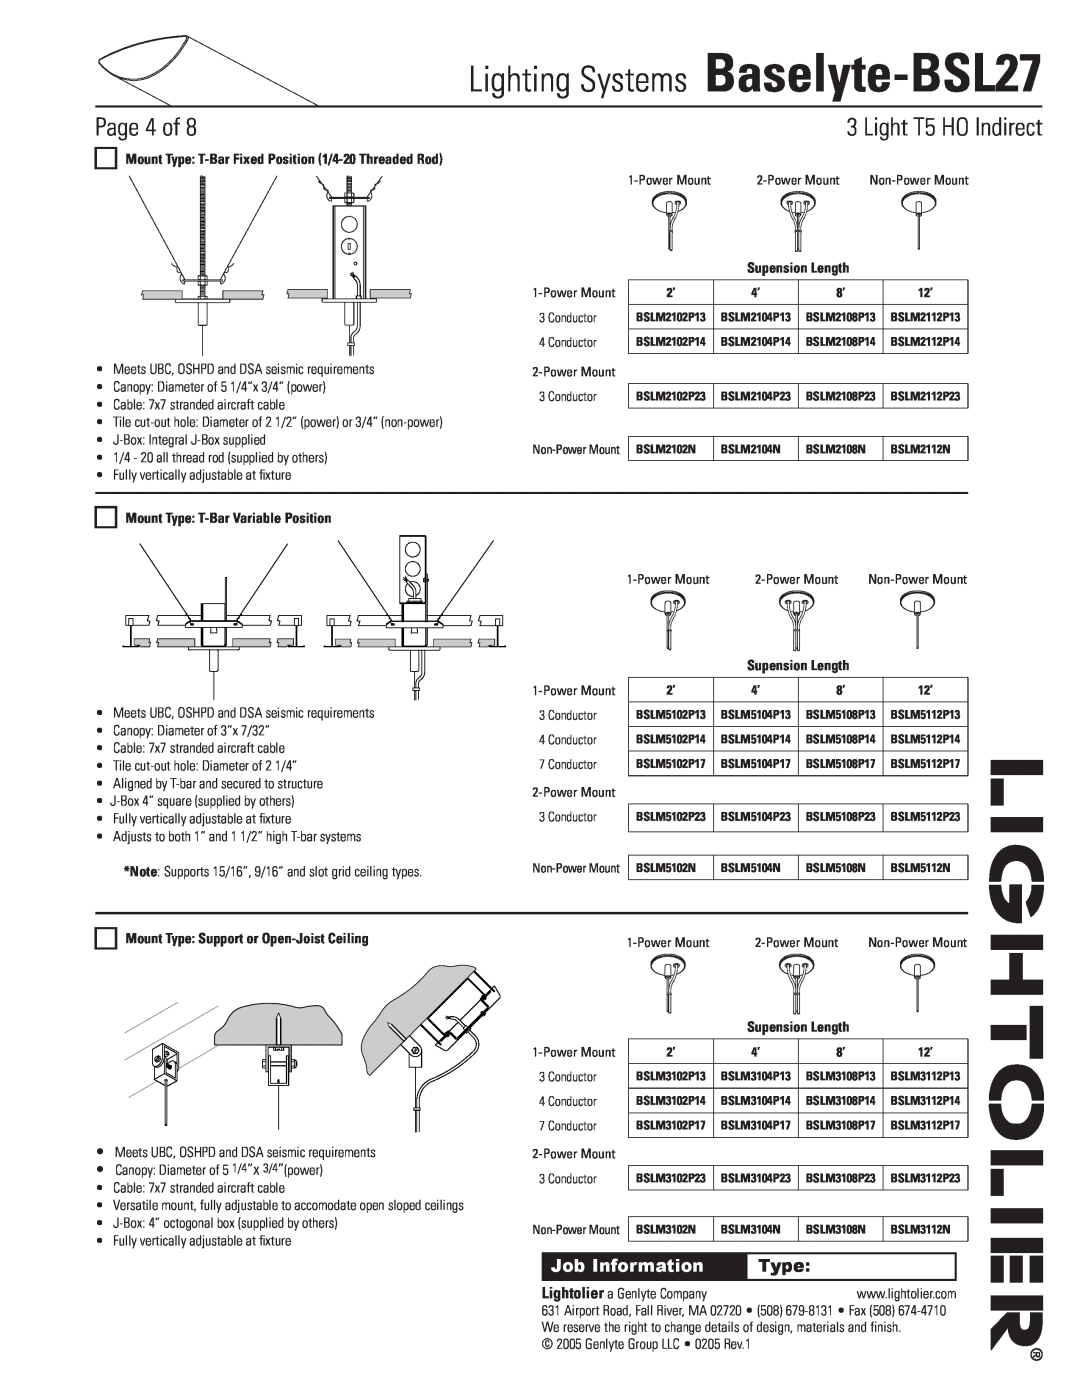 Lightolier Baselyte-BSL27 Mount Type T-BarVariable Position, Mount Type Support or Open-JoistCeiling, Page of 